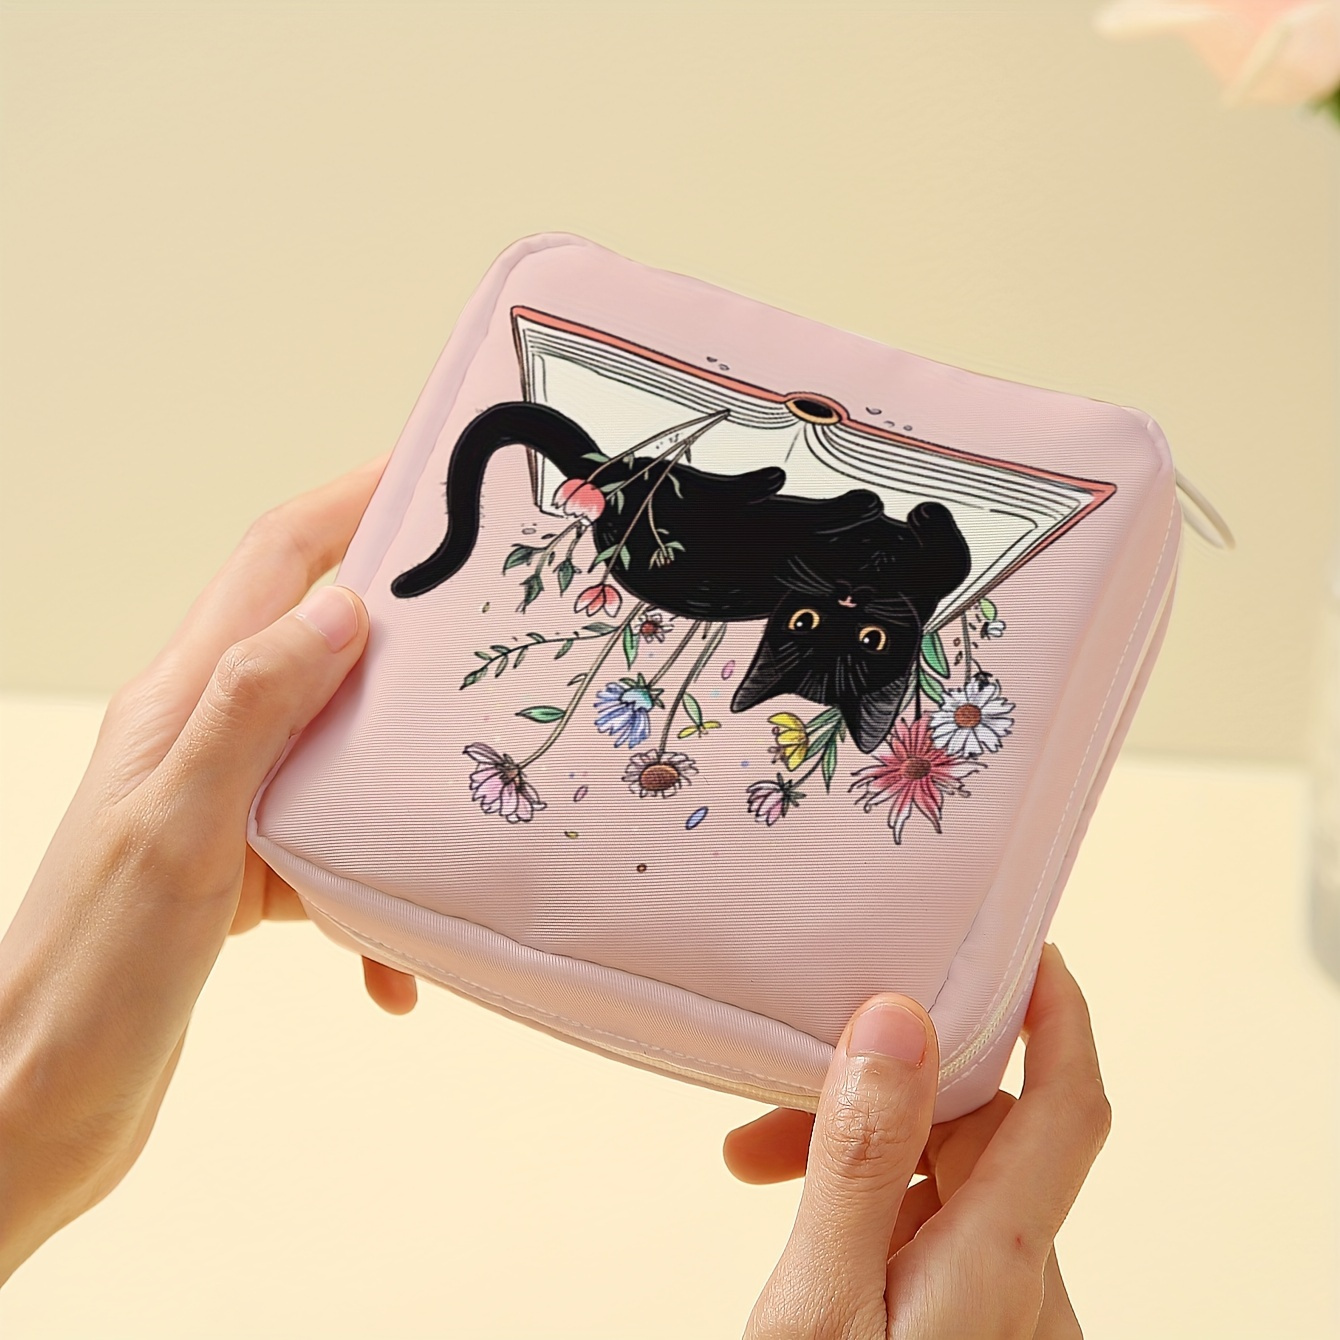 

Cat Print On Book, Portable Large Capacity Sanitary Napkin Storage Bag, Candy And Miscellaneous Items Storage Bag, Lightweight Multifunctional Bag